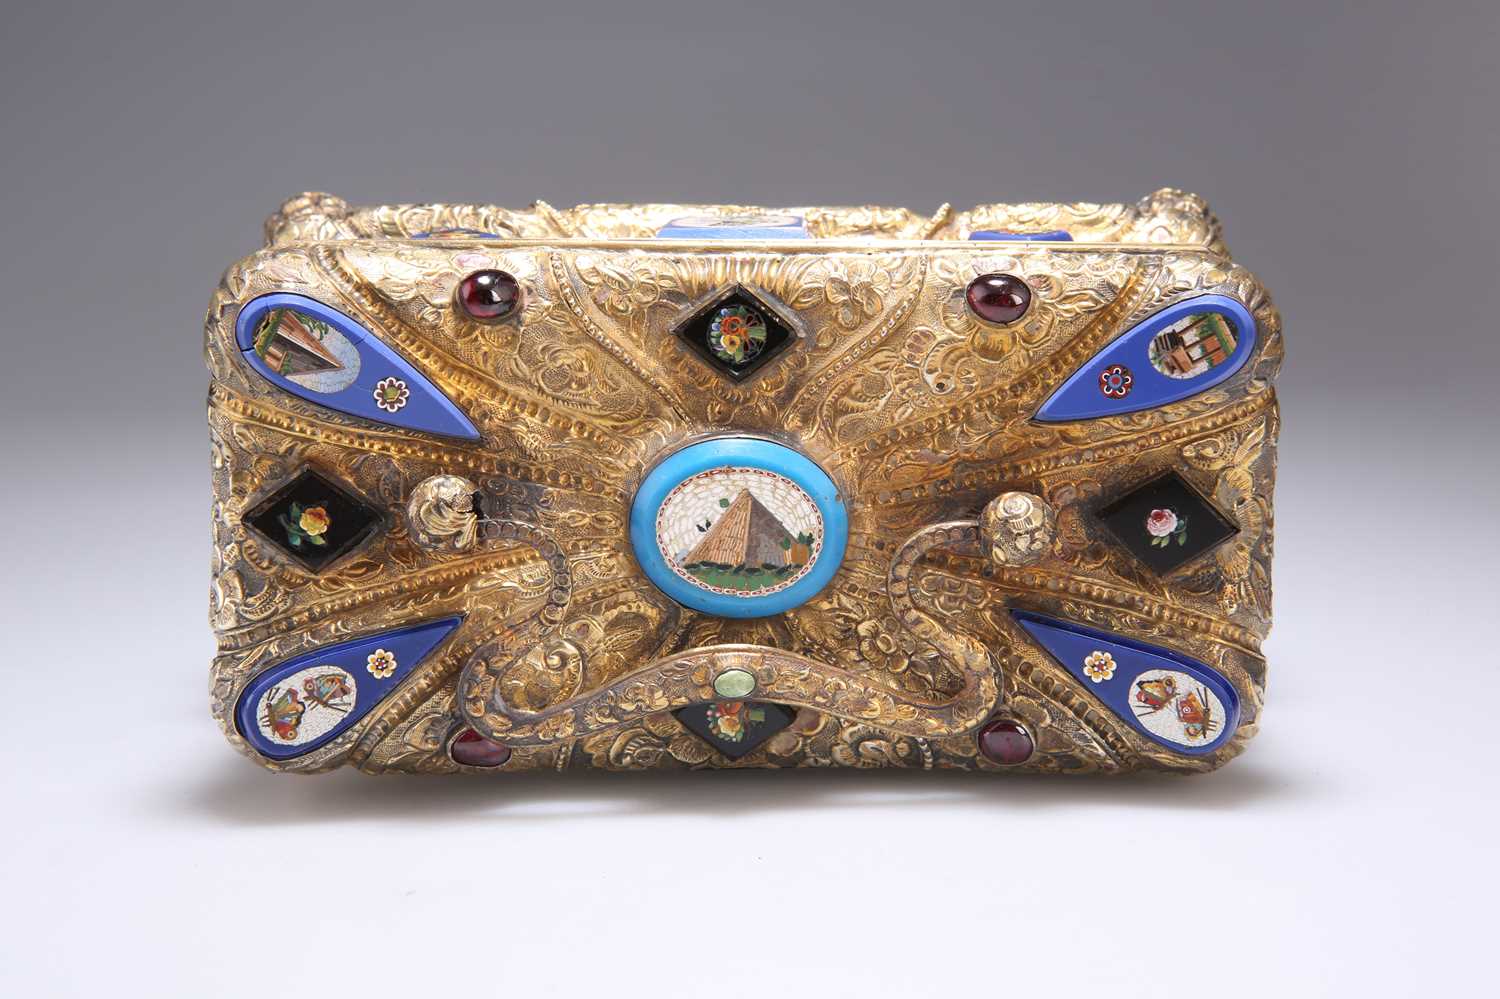 A RARE VIENNESE SILVER-GILT CASKET MOUNTED WITH CAMEOS, MICROMOSAICS AND 'JEWELS' - Image 4 of 5